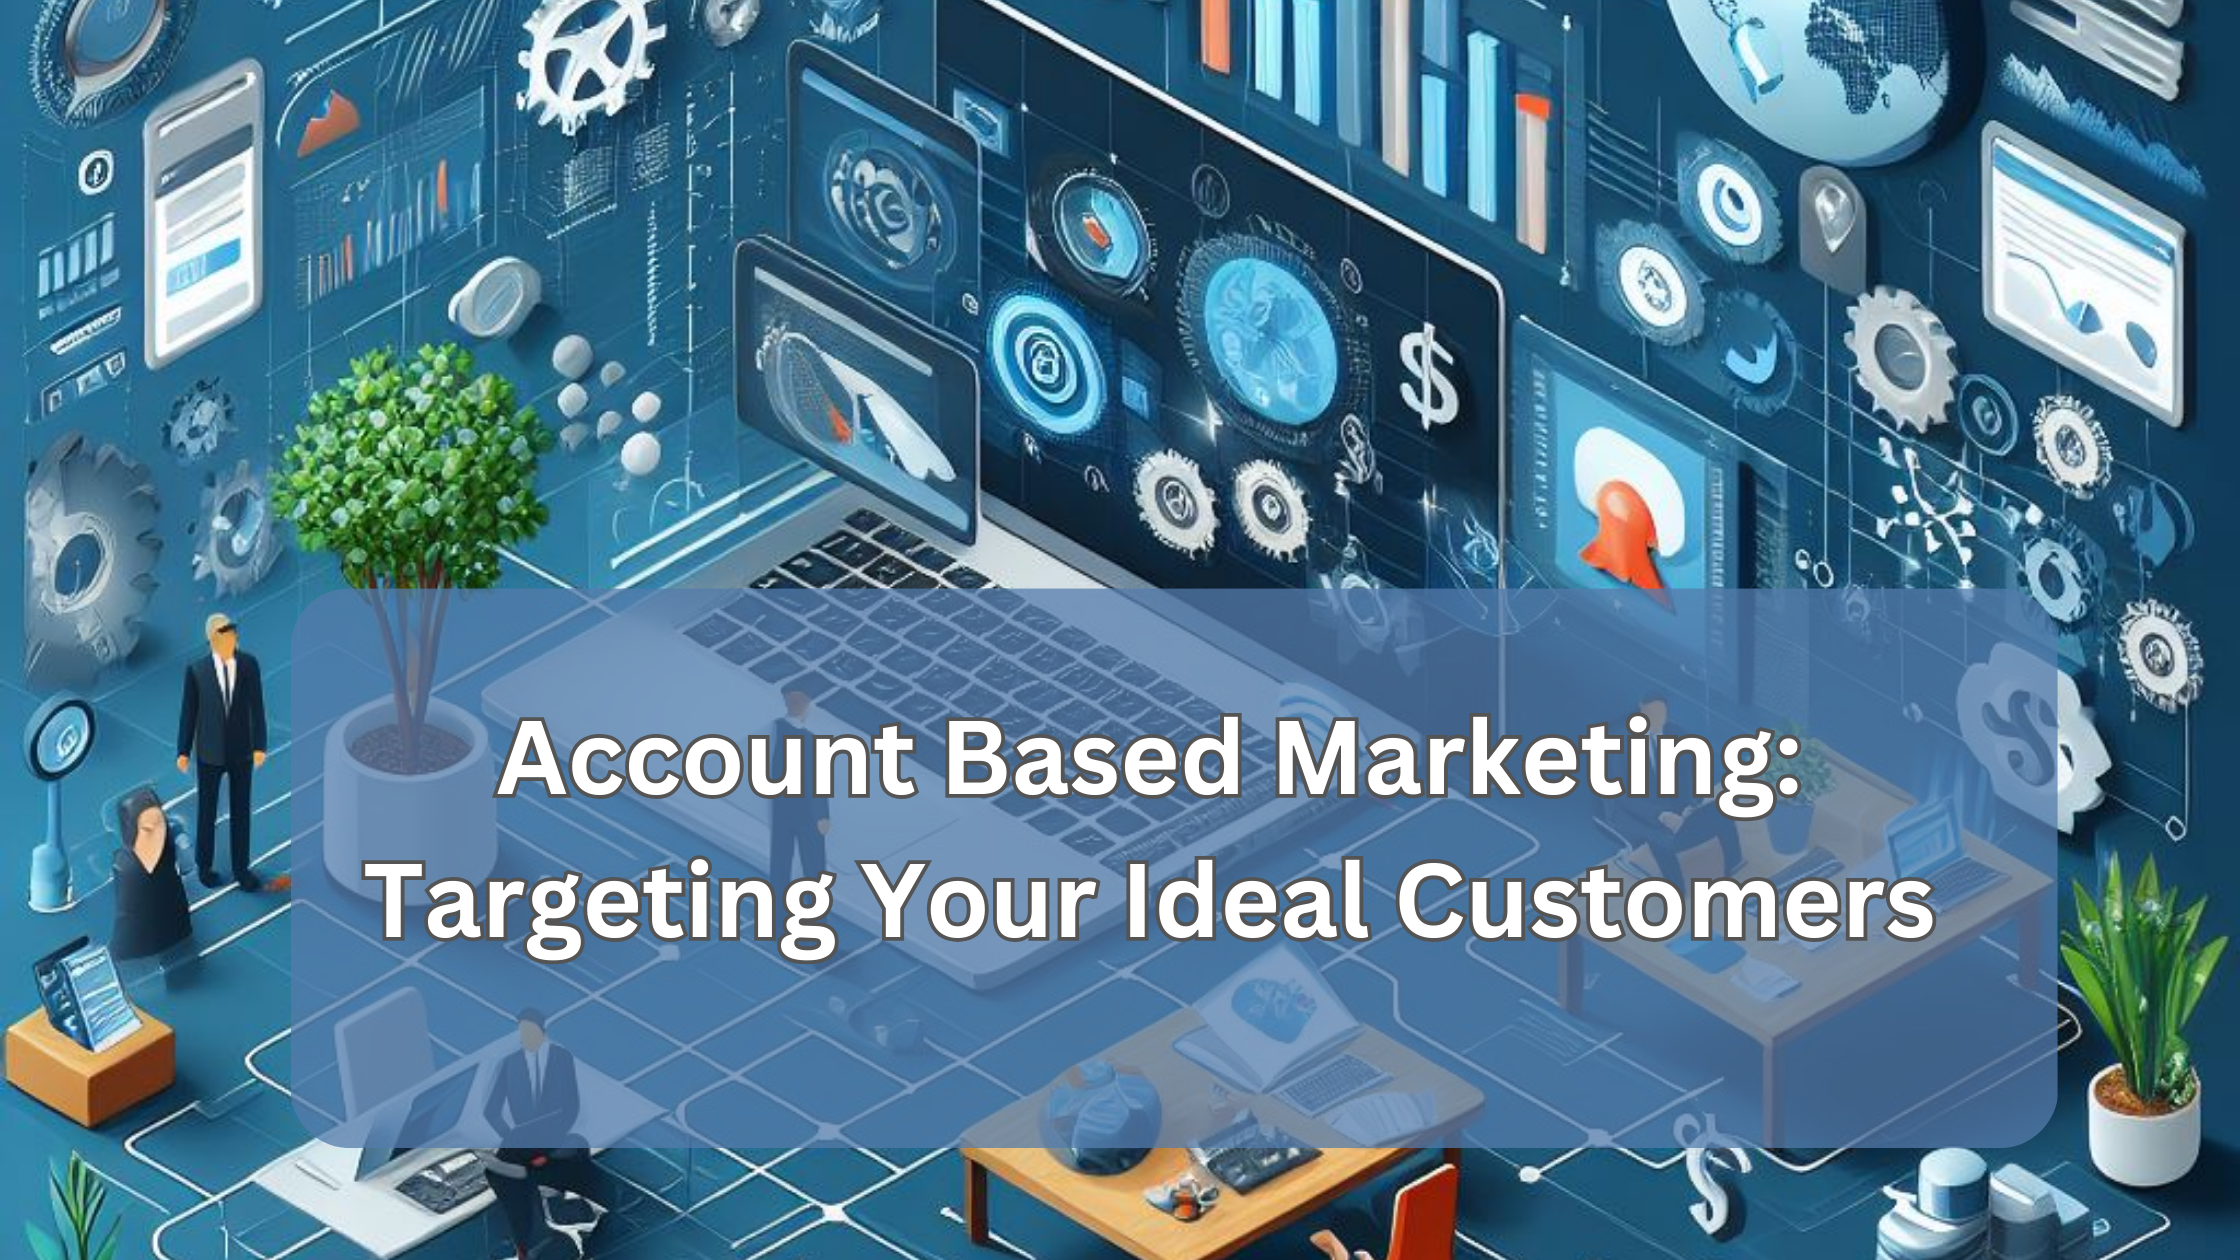 Account Based Marketing: Targeting Your Ideal Customers